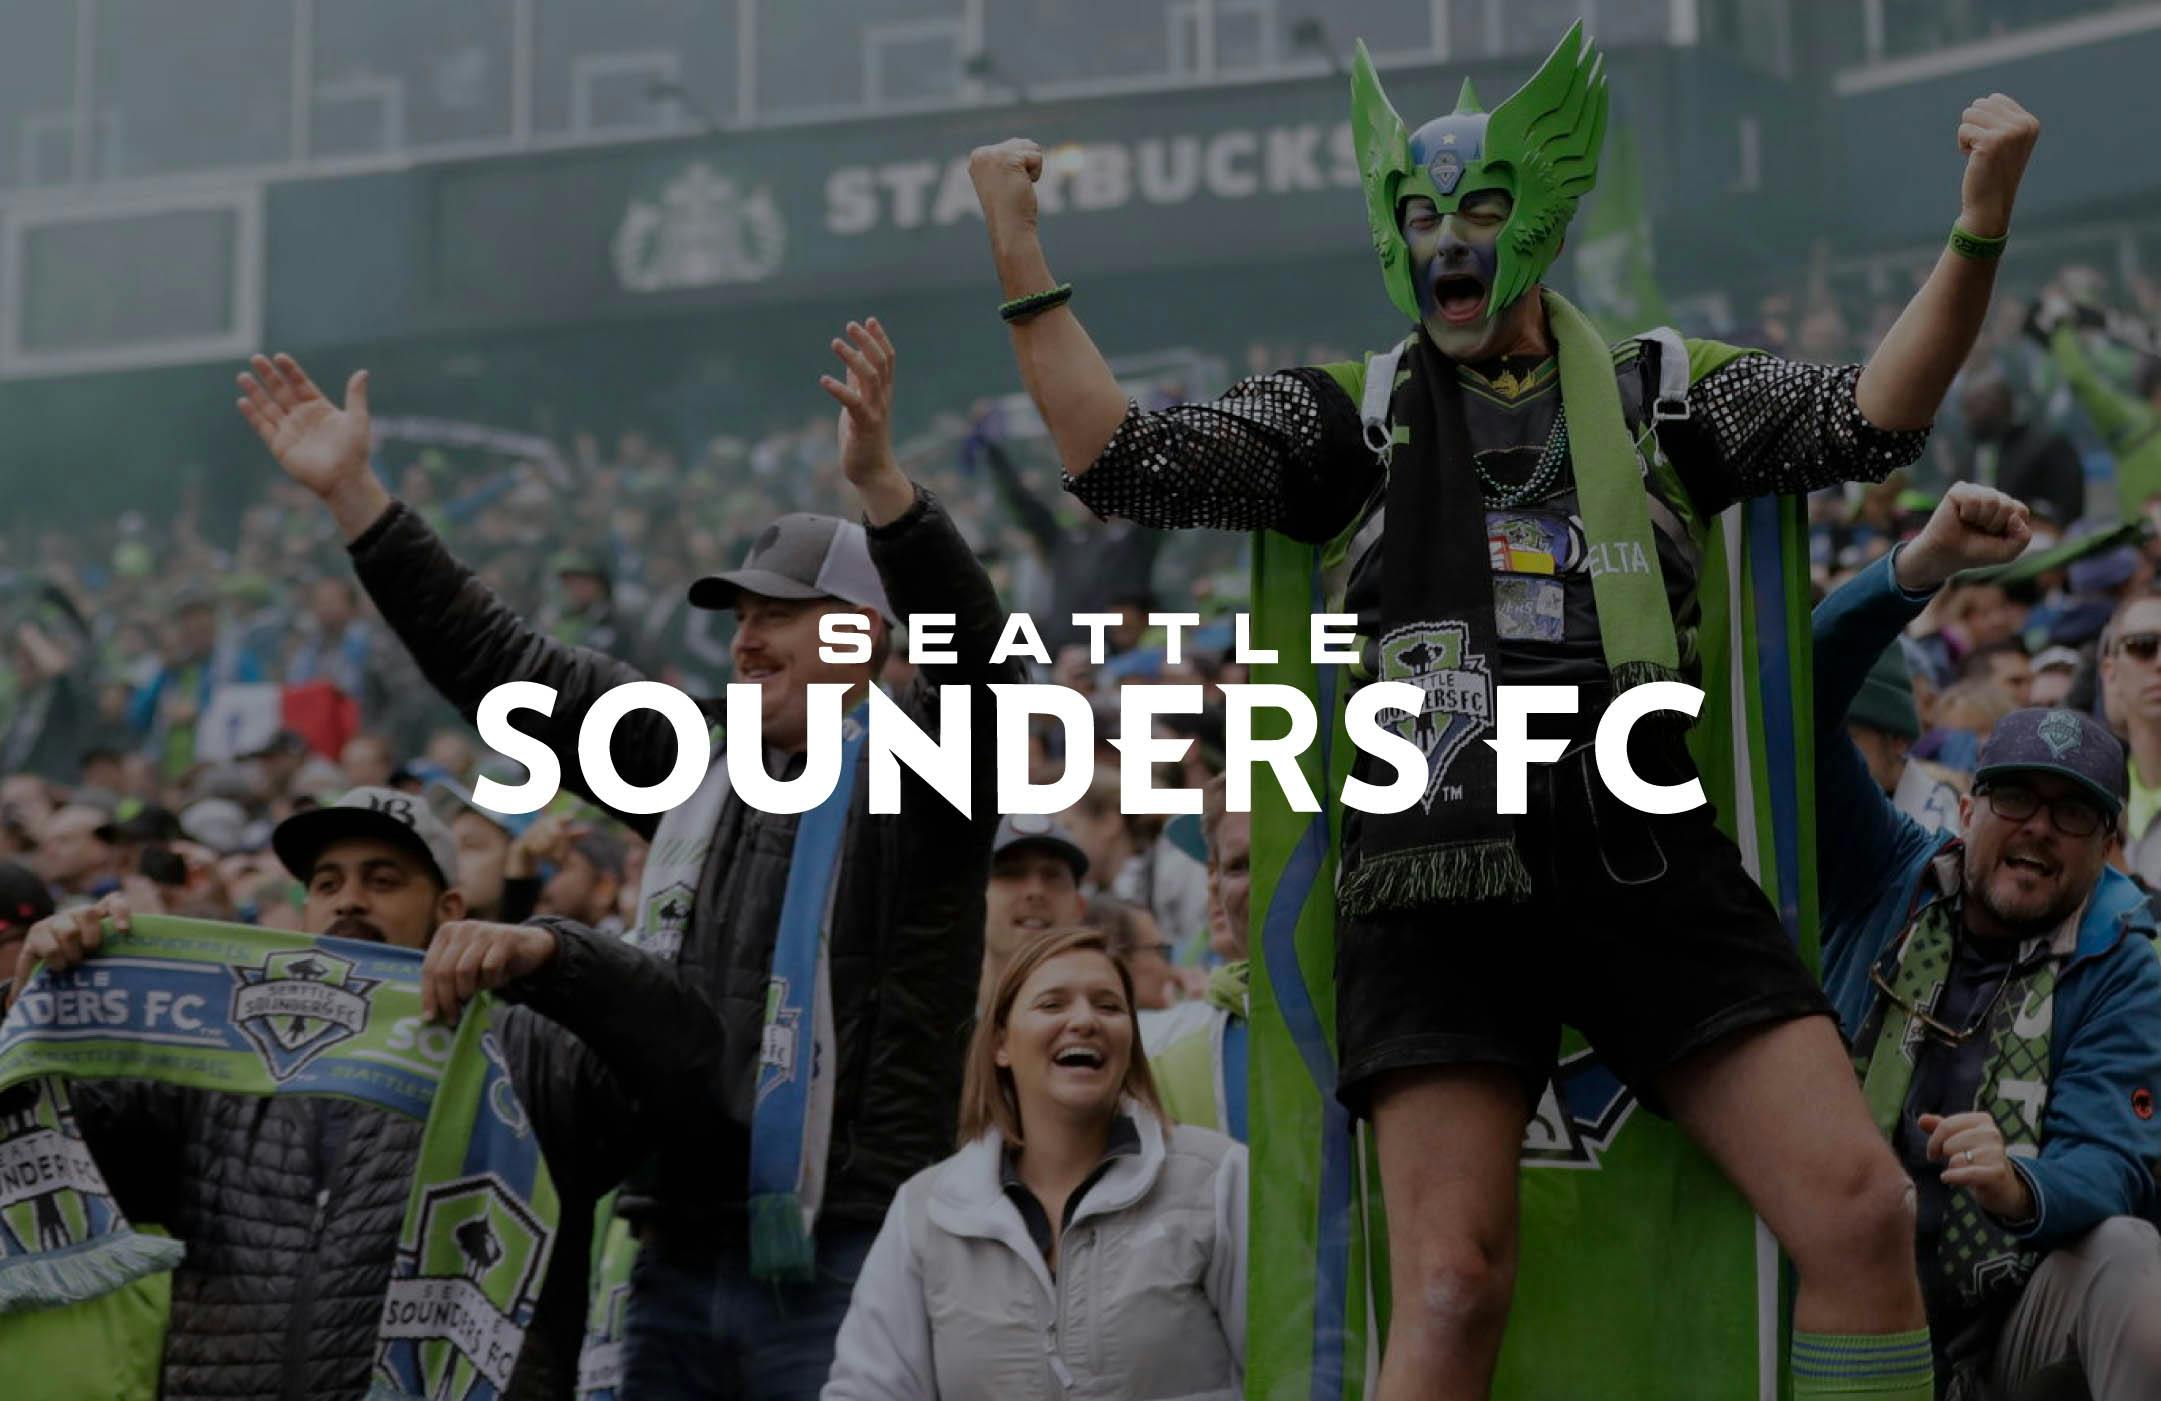 Image of Sounders fan standing up with arms up with text: Seattle Sounders FC